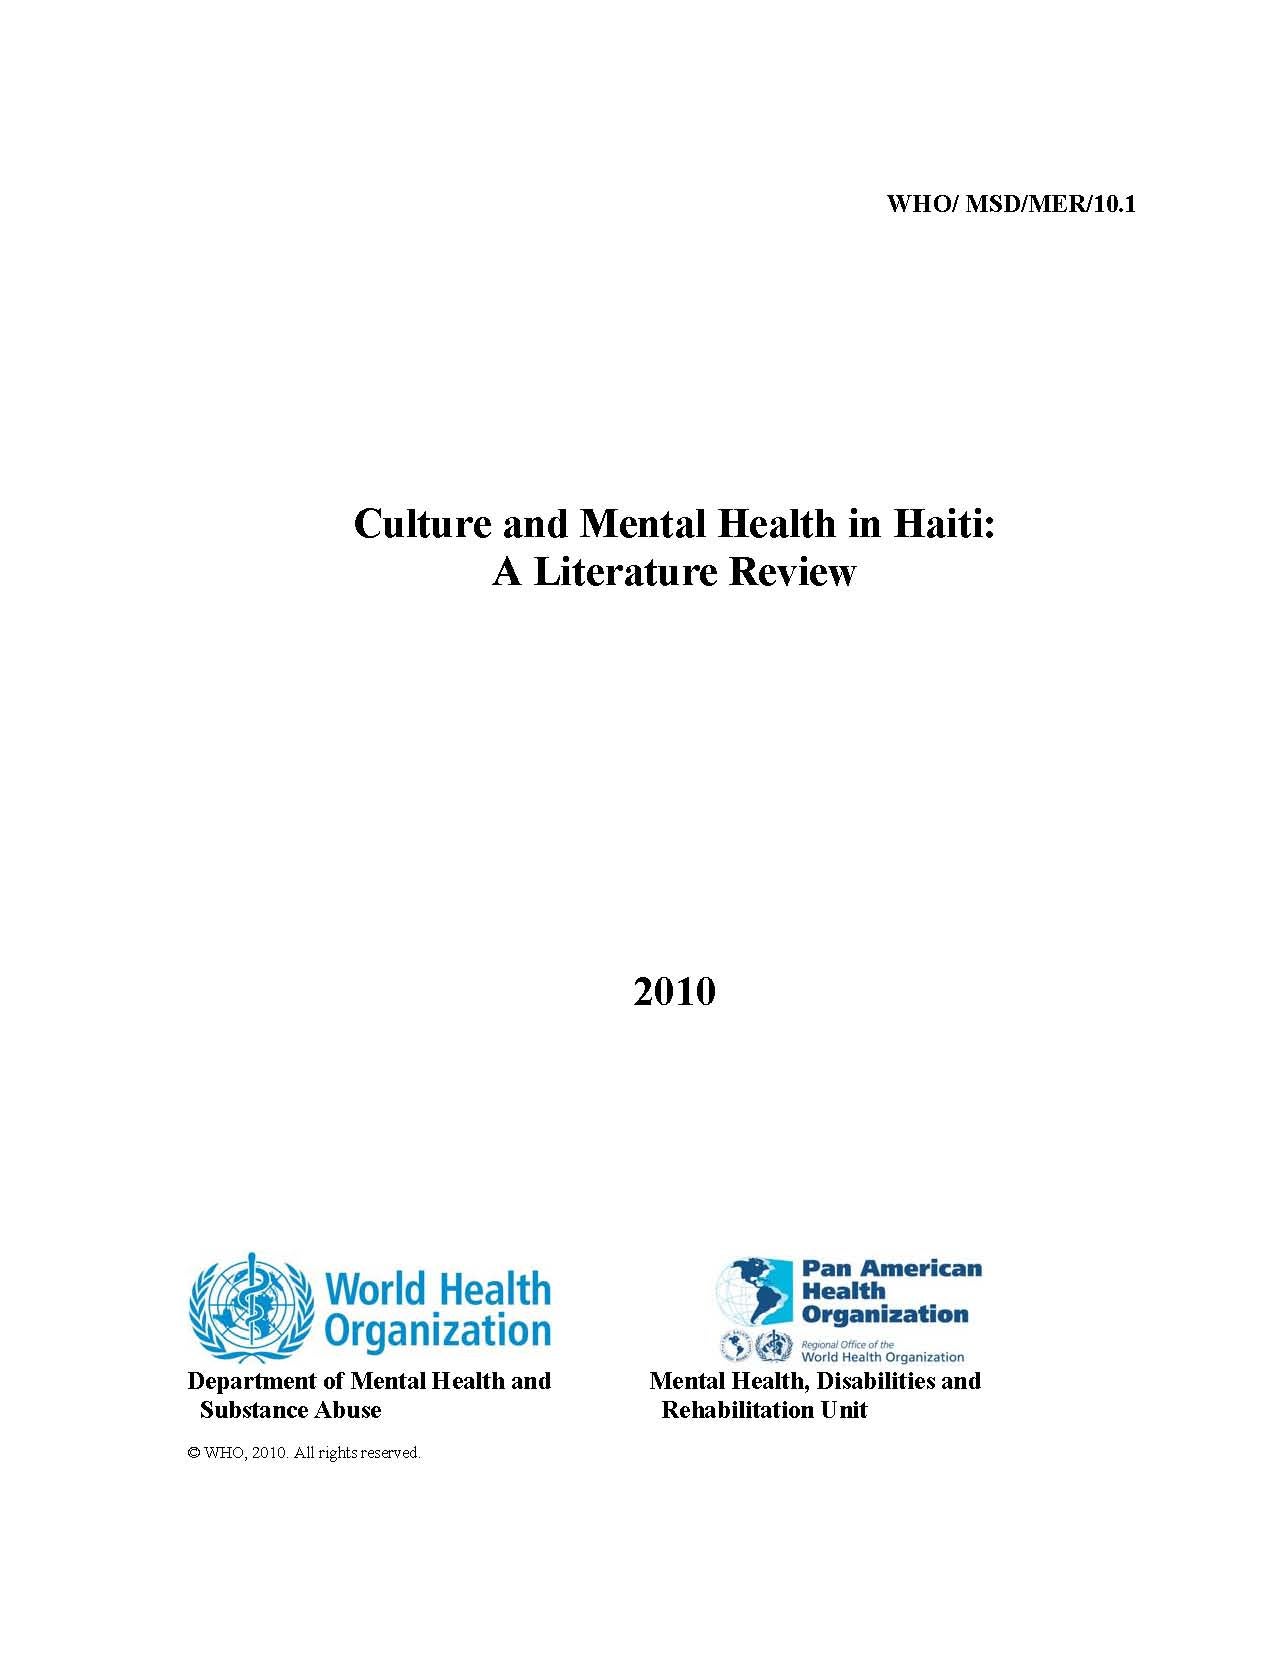 Culture and Mental Health in Haiti:A Literature Review,WHO, PAHO, 2010 